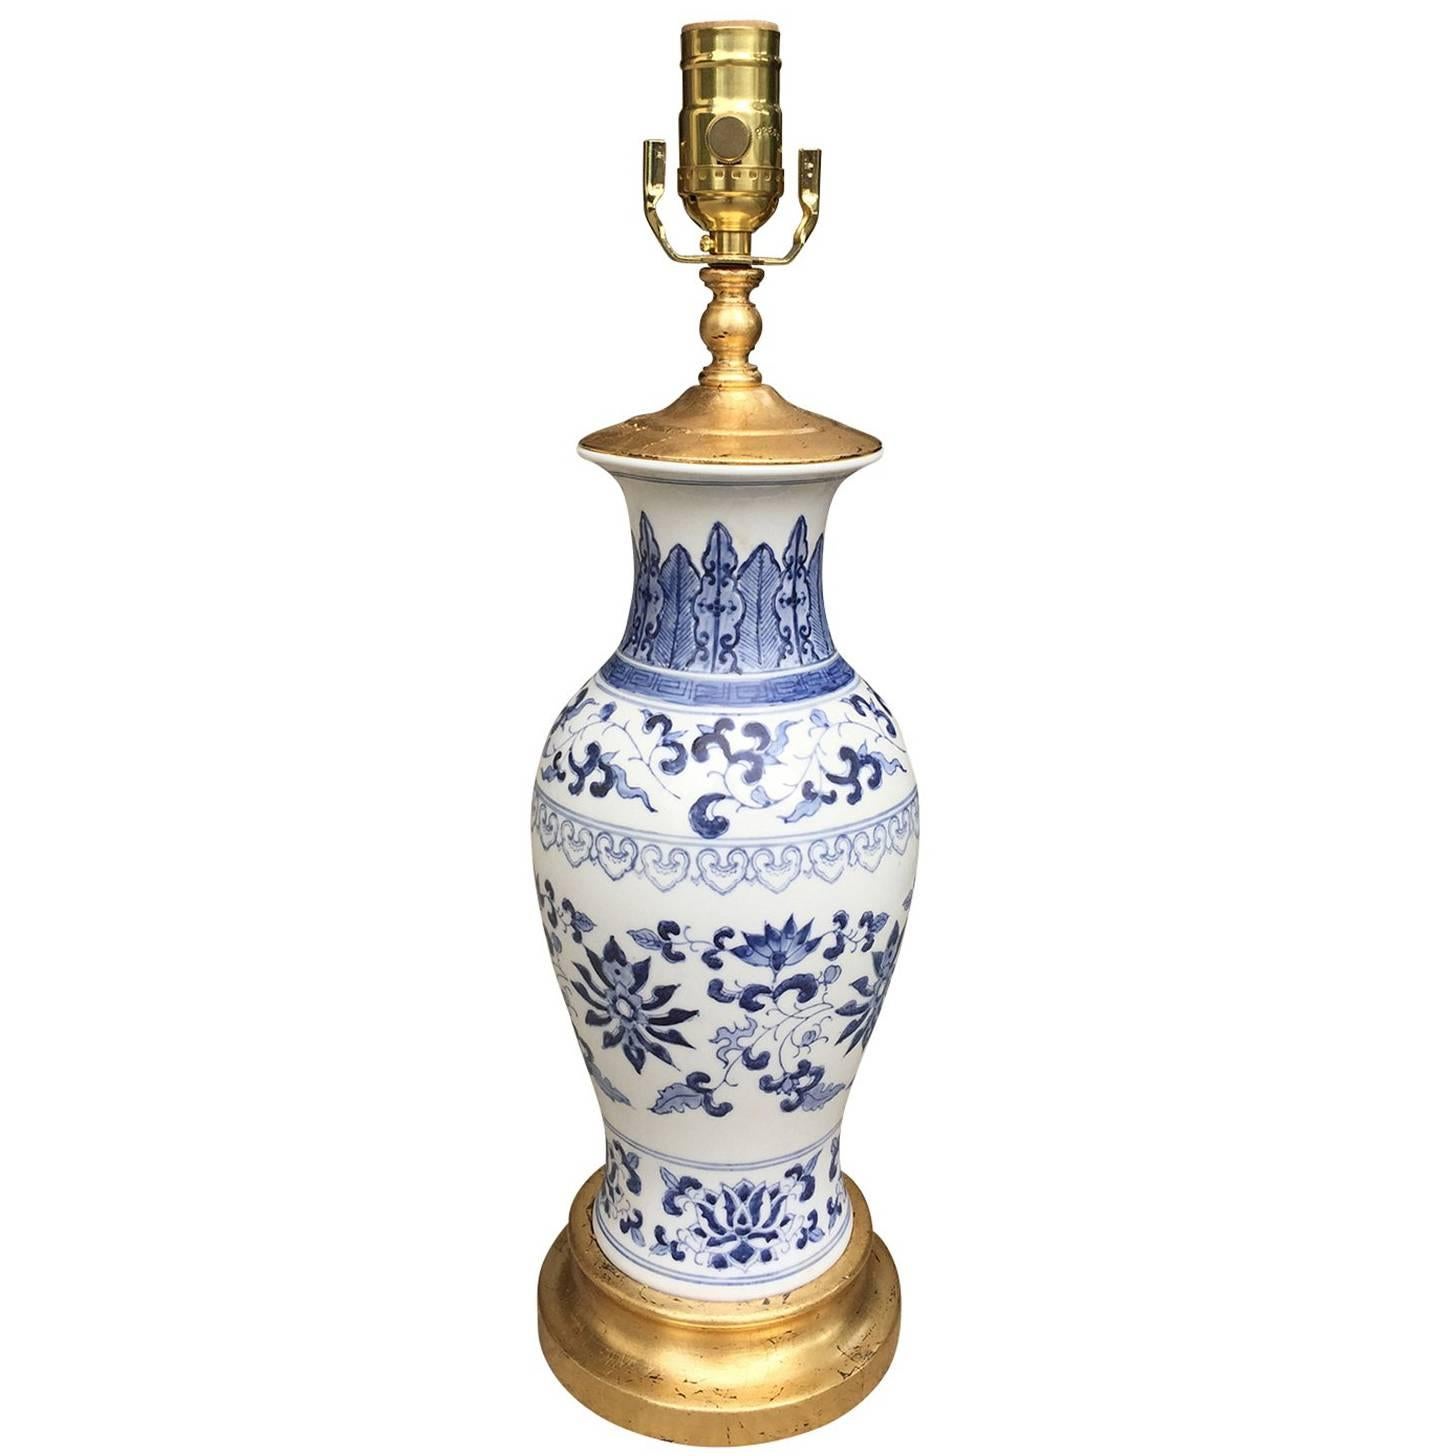 Chinese Blue and White Porcelain Lamp, circa 1860